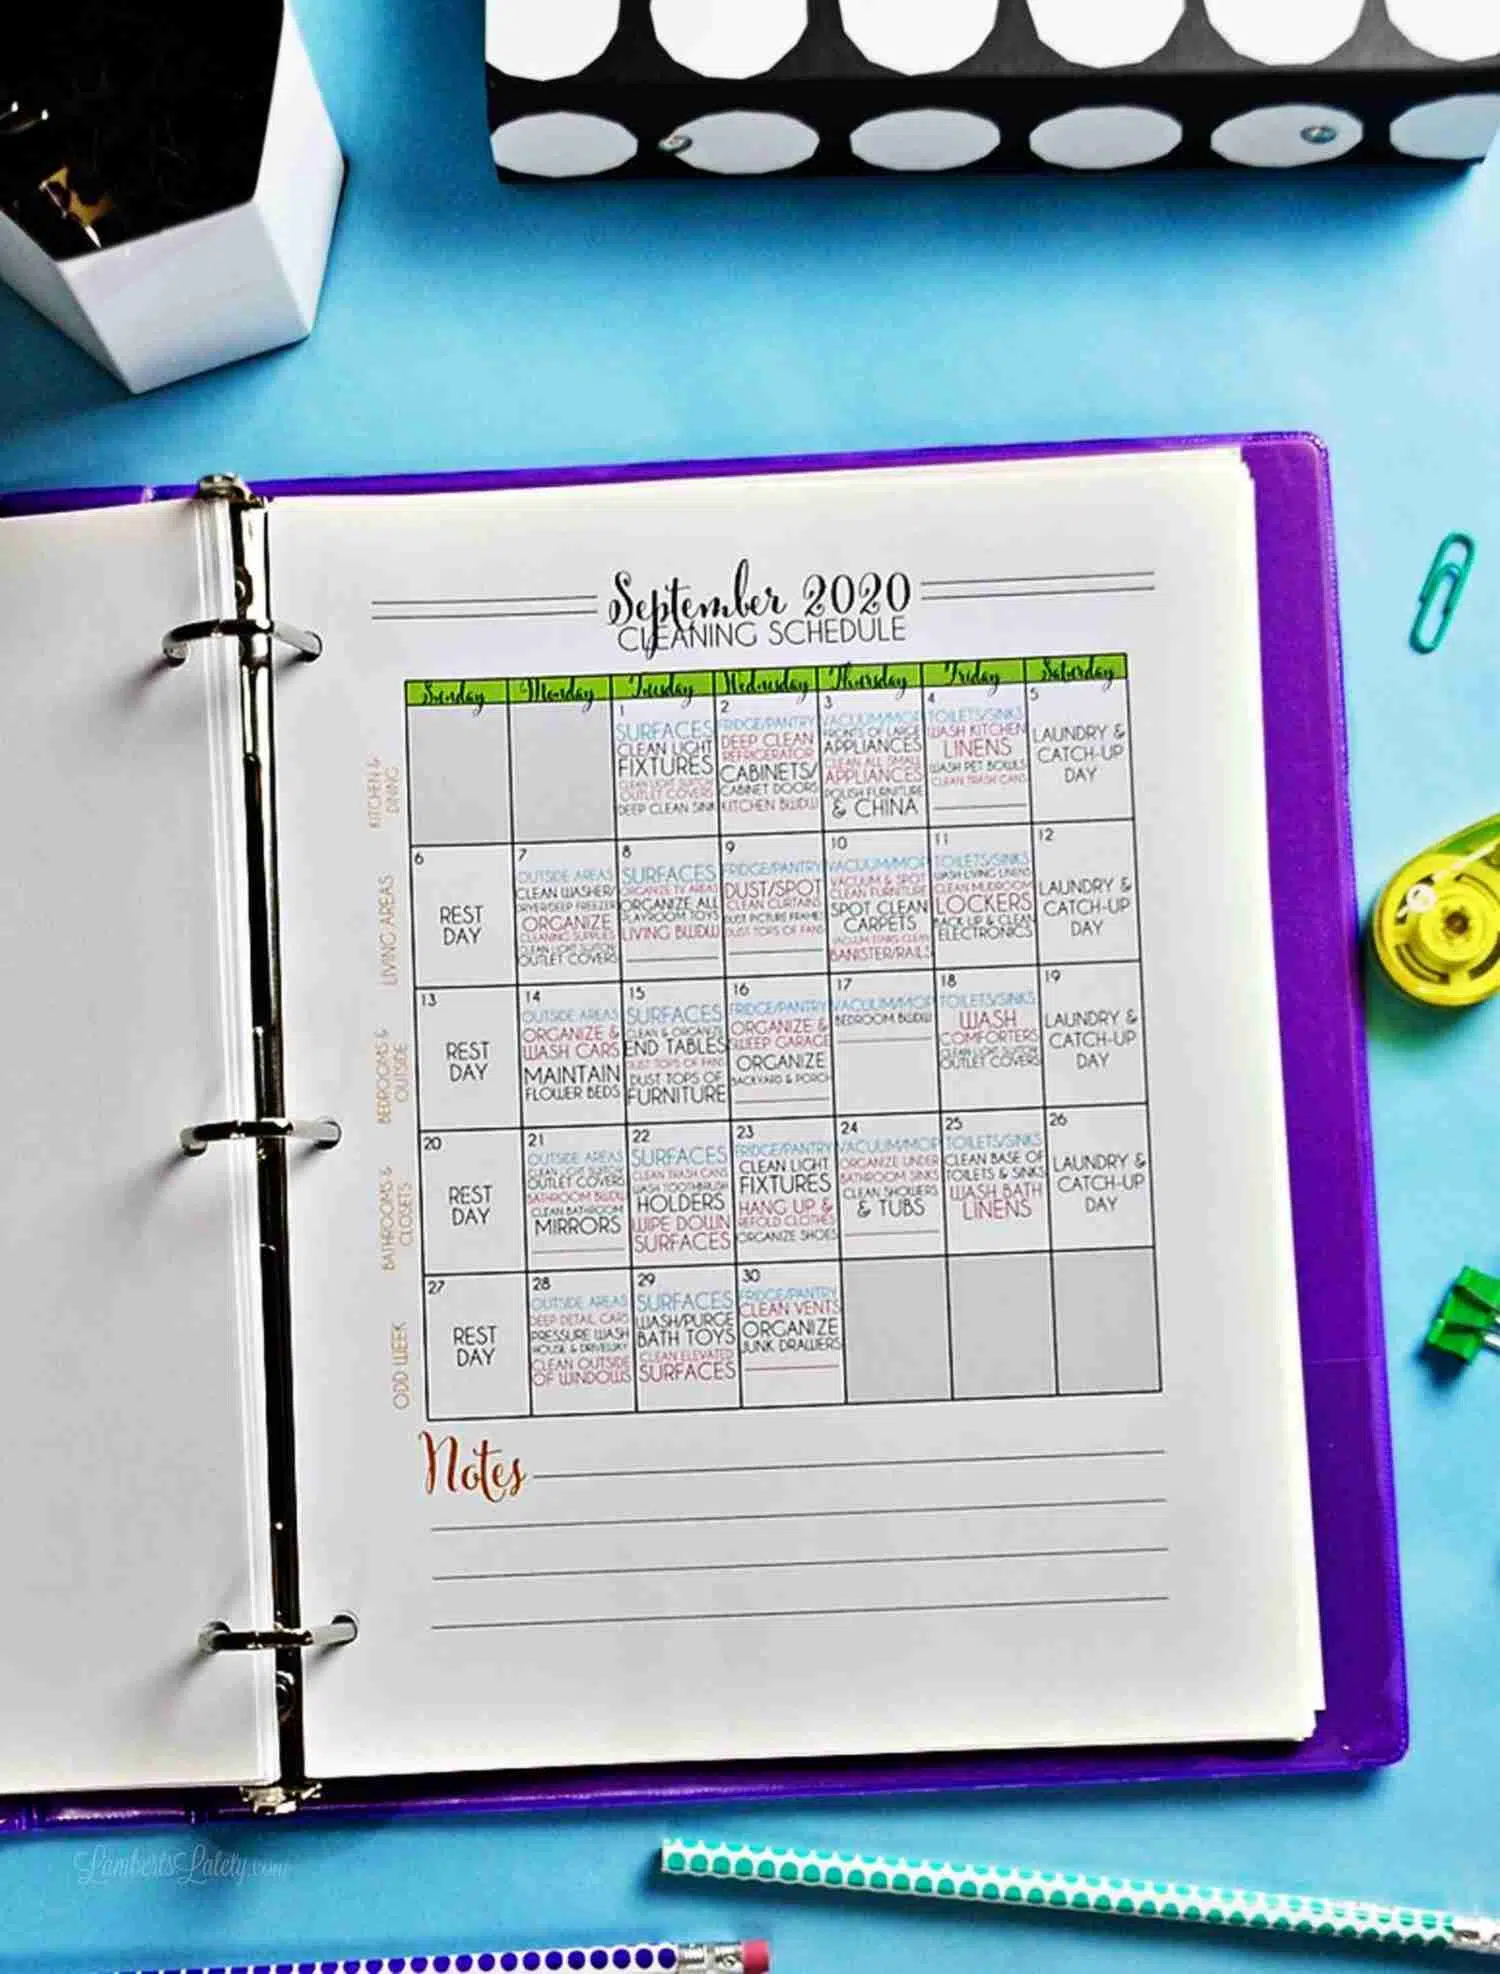 September 2020 cleaning schedule in a notebook